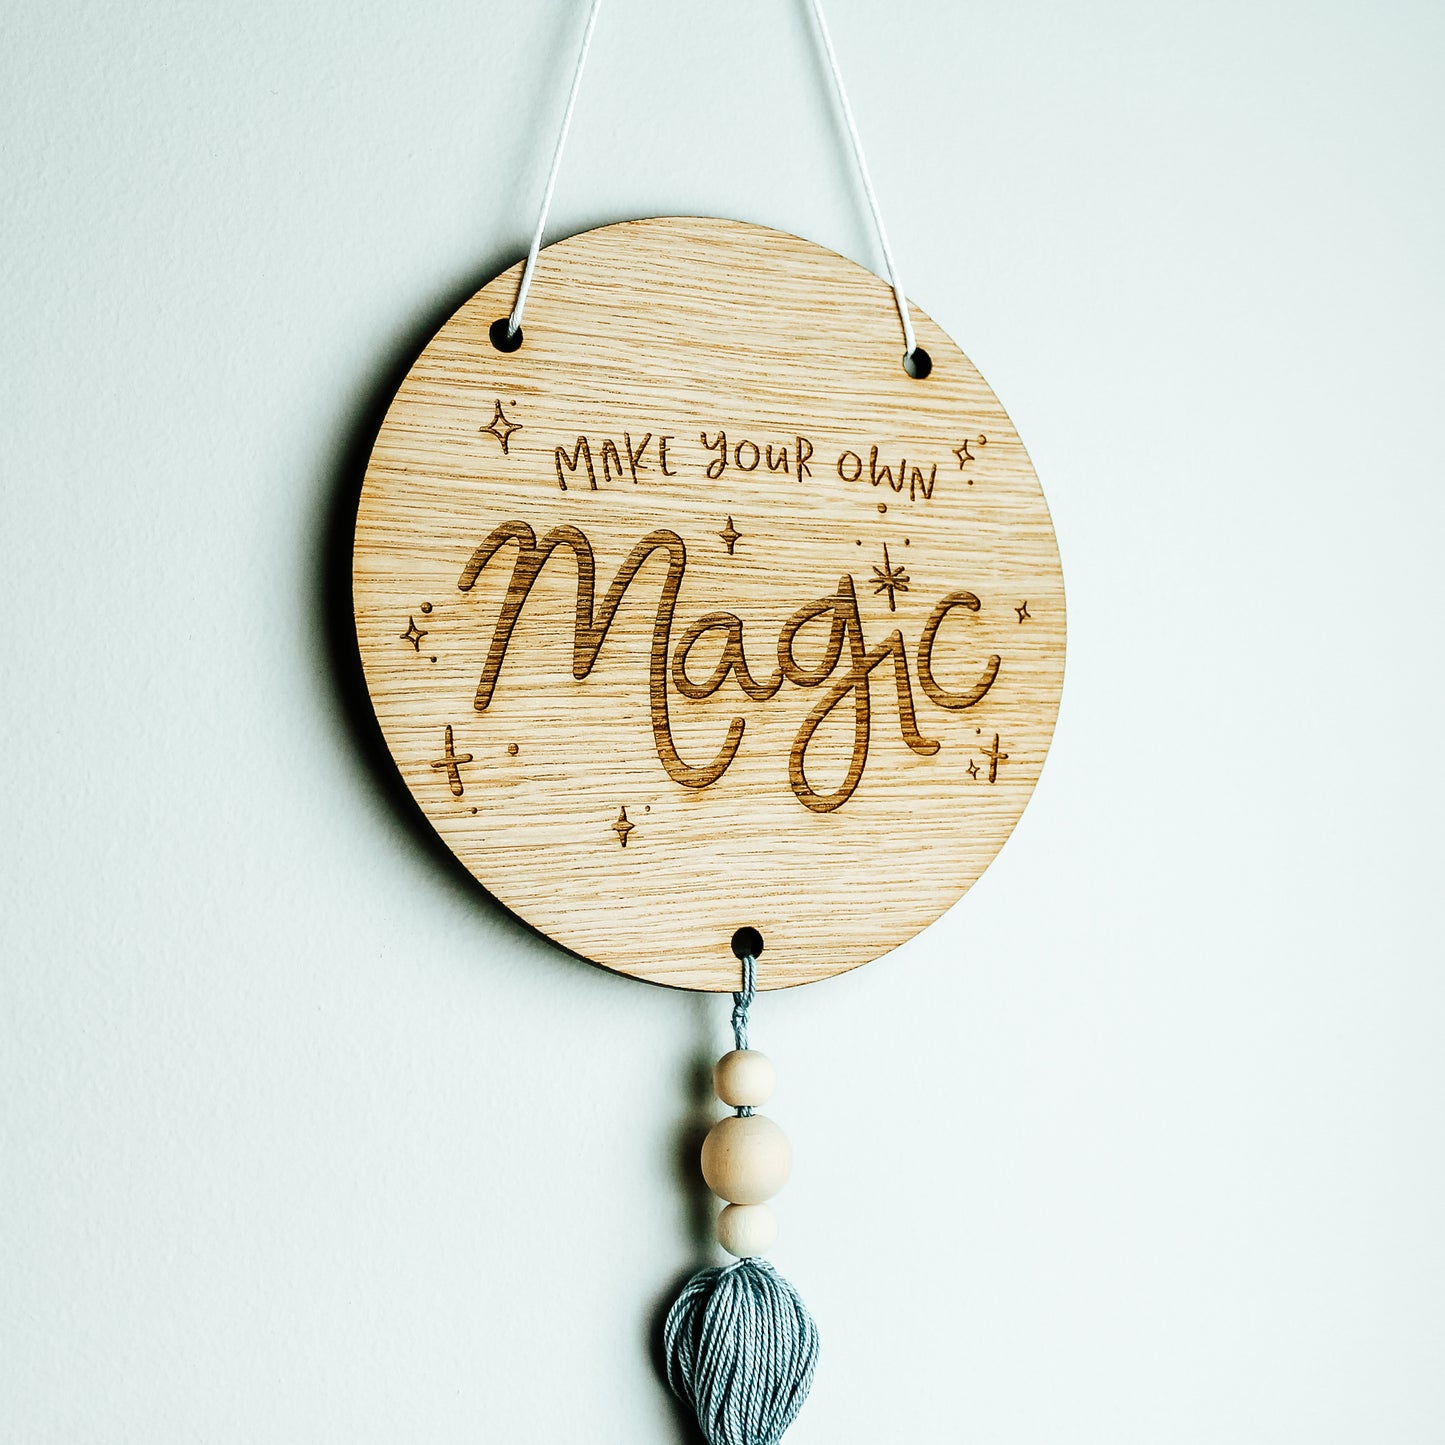 Make Magic - Inspirational Round Wooden Sign With Tassel